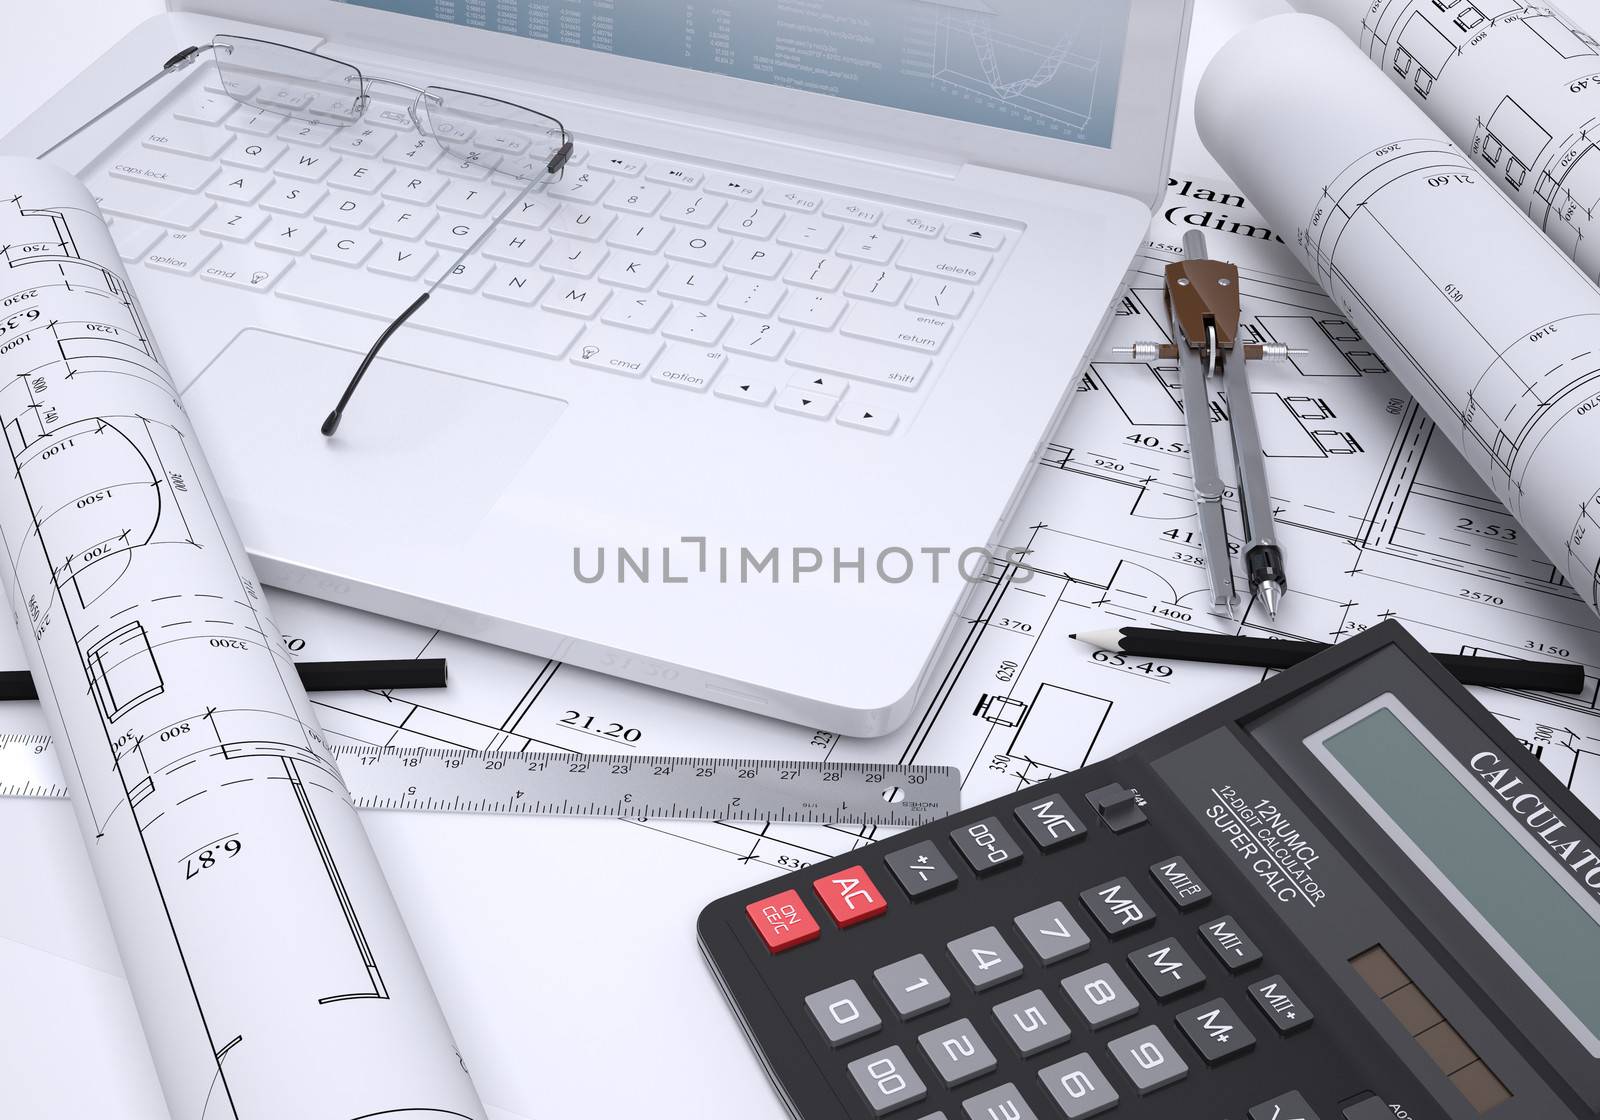 The book, calculator, paper and laptop. 3d rendering. The concept of new technologies